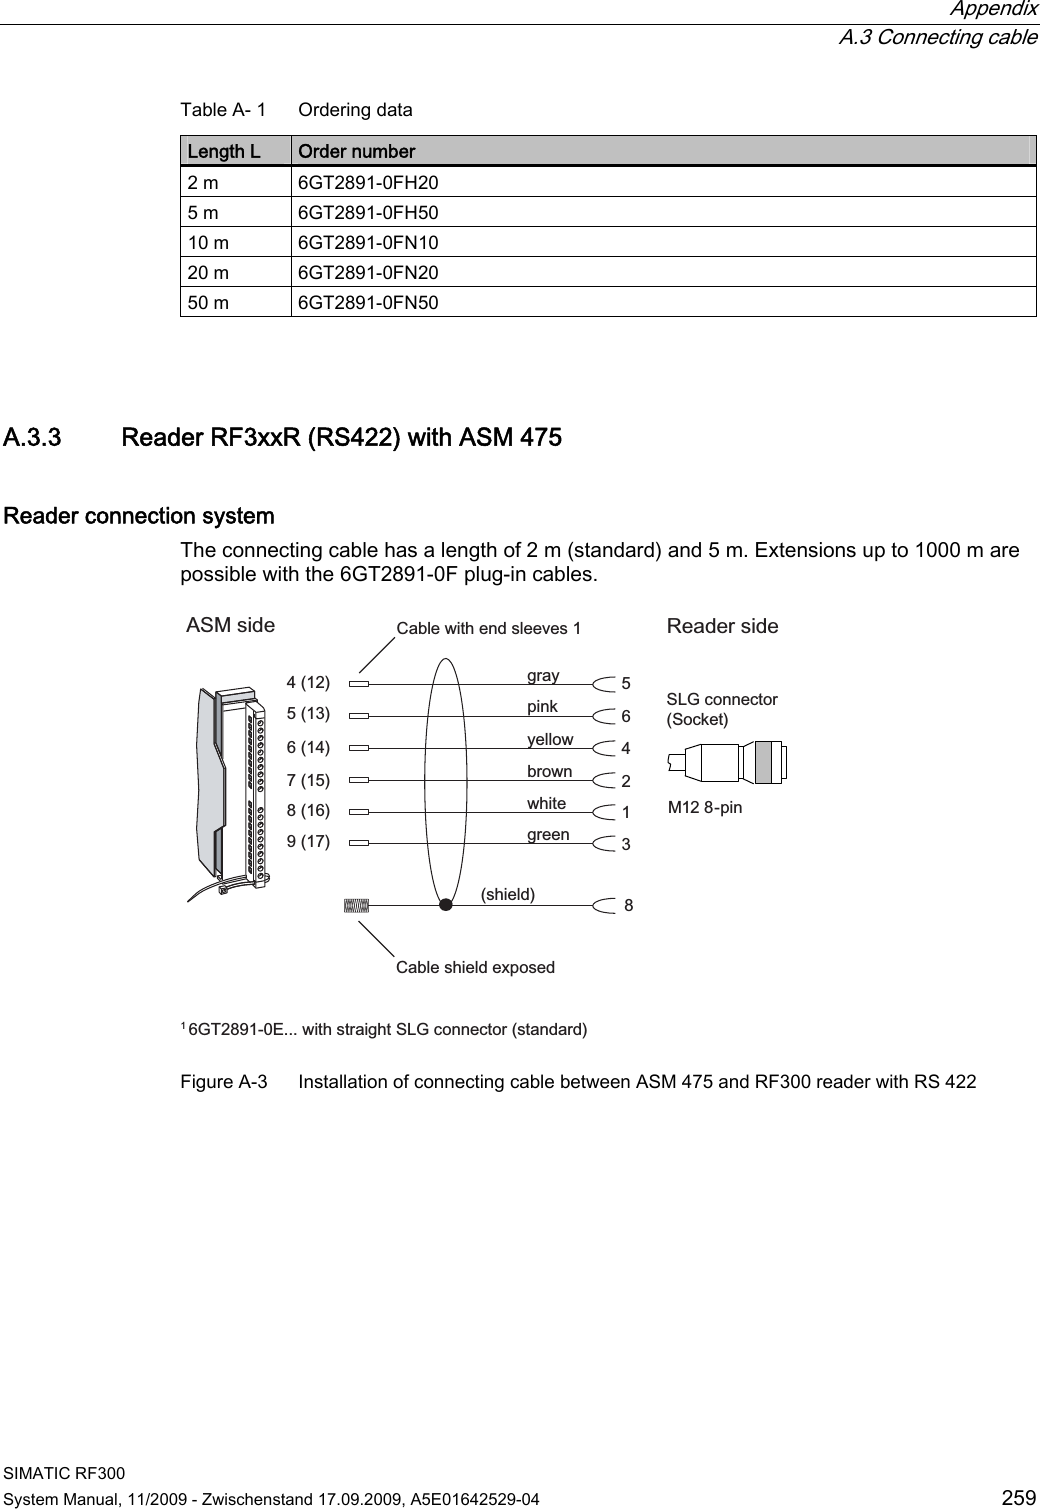  Appendix  A.3 Connecting cable SIMATIC RF300 System Manual, 11/2009 - Zwischenstand 17.09.2009, A5E01642529-04  259 Table A- 1  Ordering data Length L  Order number 2 m  6GT2891-0FH20 5 m  6GT2891-0FH50 10 m  6GT2891-0FN10 20 m  6GT2891-0FN20 50 m  6GT2891-0FN50  A.3.3 Reader RF3xxR (RS422) with ASM 475 Reader connection system The connecting cable has a length of 2 m (standard) and 5 m. Extensions up to 1000 m are possible with the 6GT2891-0F plug-in cables.  &amp;DEOHZLWKHQGVOHHYHVJUD\SLQN\HOORZEURZQZKLWHVKLHOG&amp;DEOHVKLHOGH[SRVHG$60VLGH 5HDGHUVLGHJUHHQ6/*FRQQHFWRU6RFNHW0SLQ*7(ZLWKVWUDLJKW6/*FRQQHFWRUVWDQGDUG Figure A-3  Installation of connecting cable between ASM 475 and RF300 reader with RS 422  